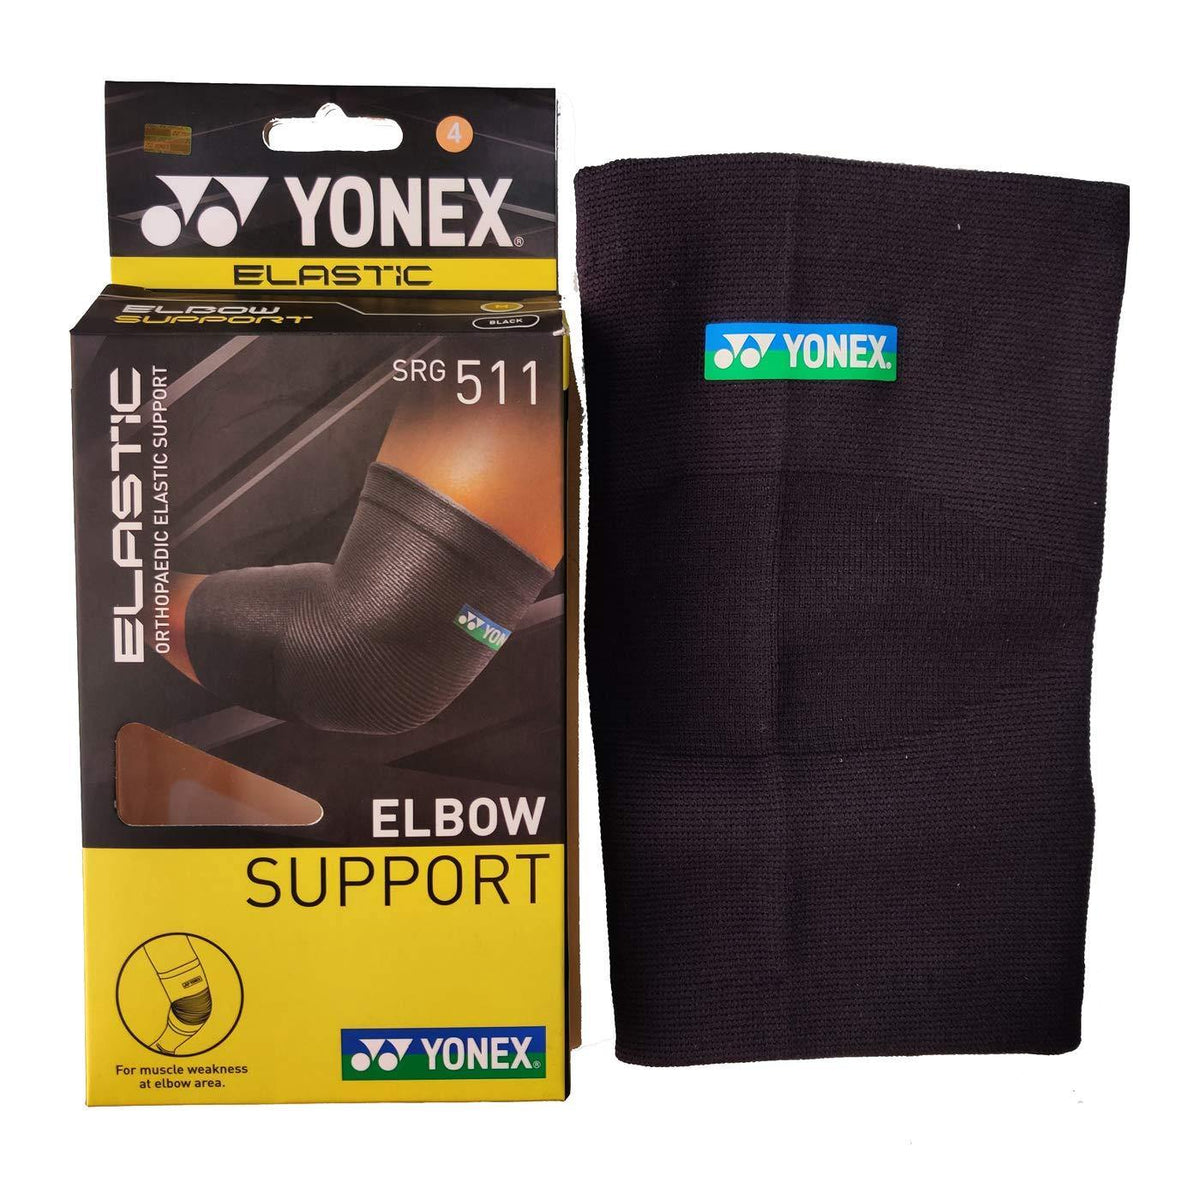 Enhance ELBOW Pain Relief and Protect your Elbow Yonex Elbow Support MTS310EL 